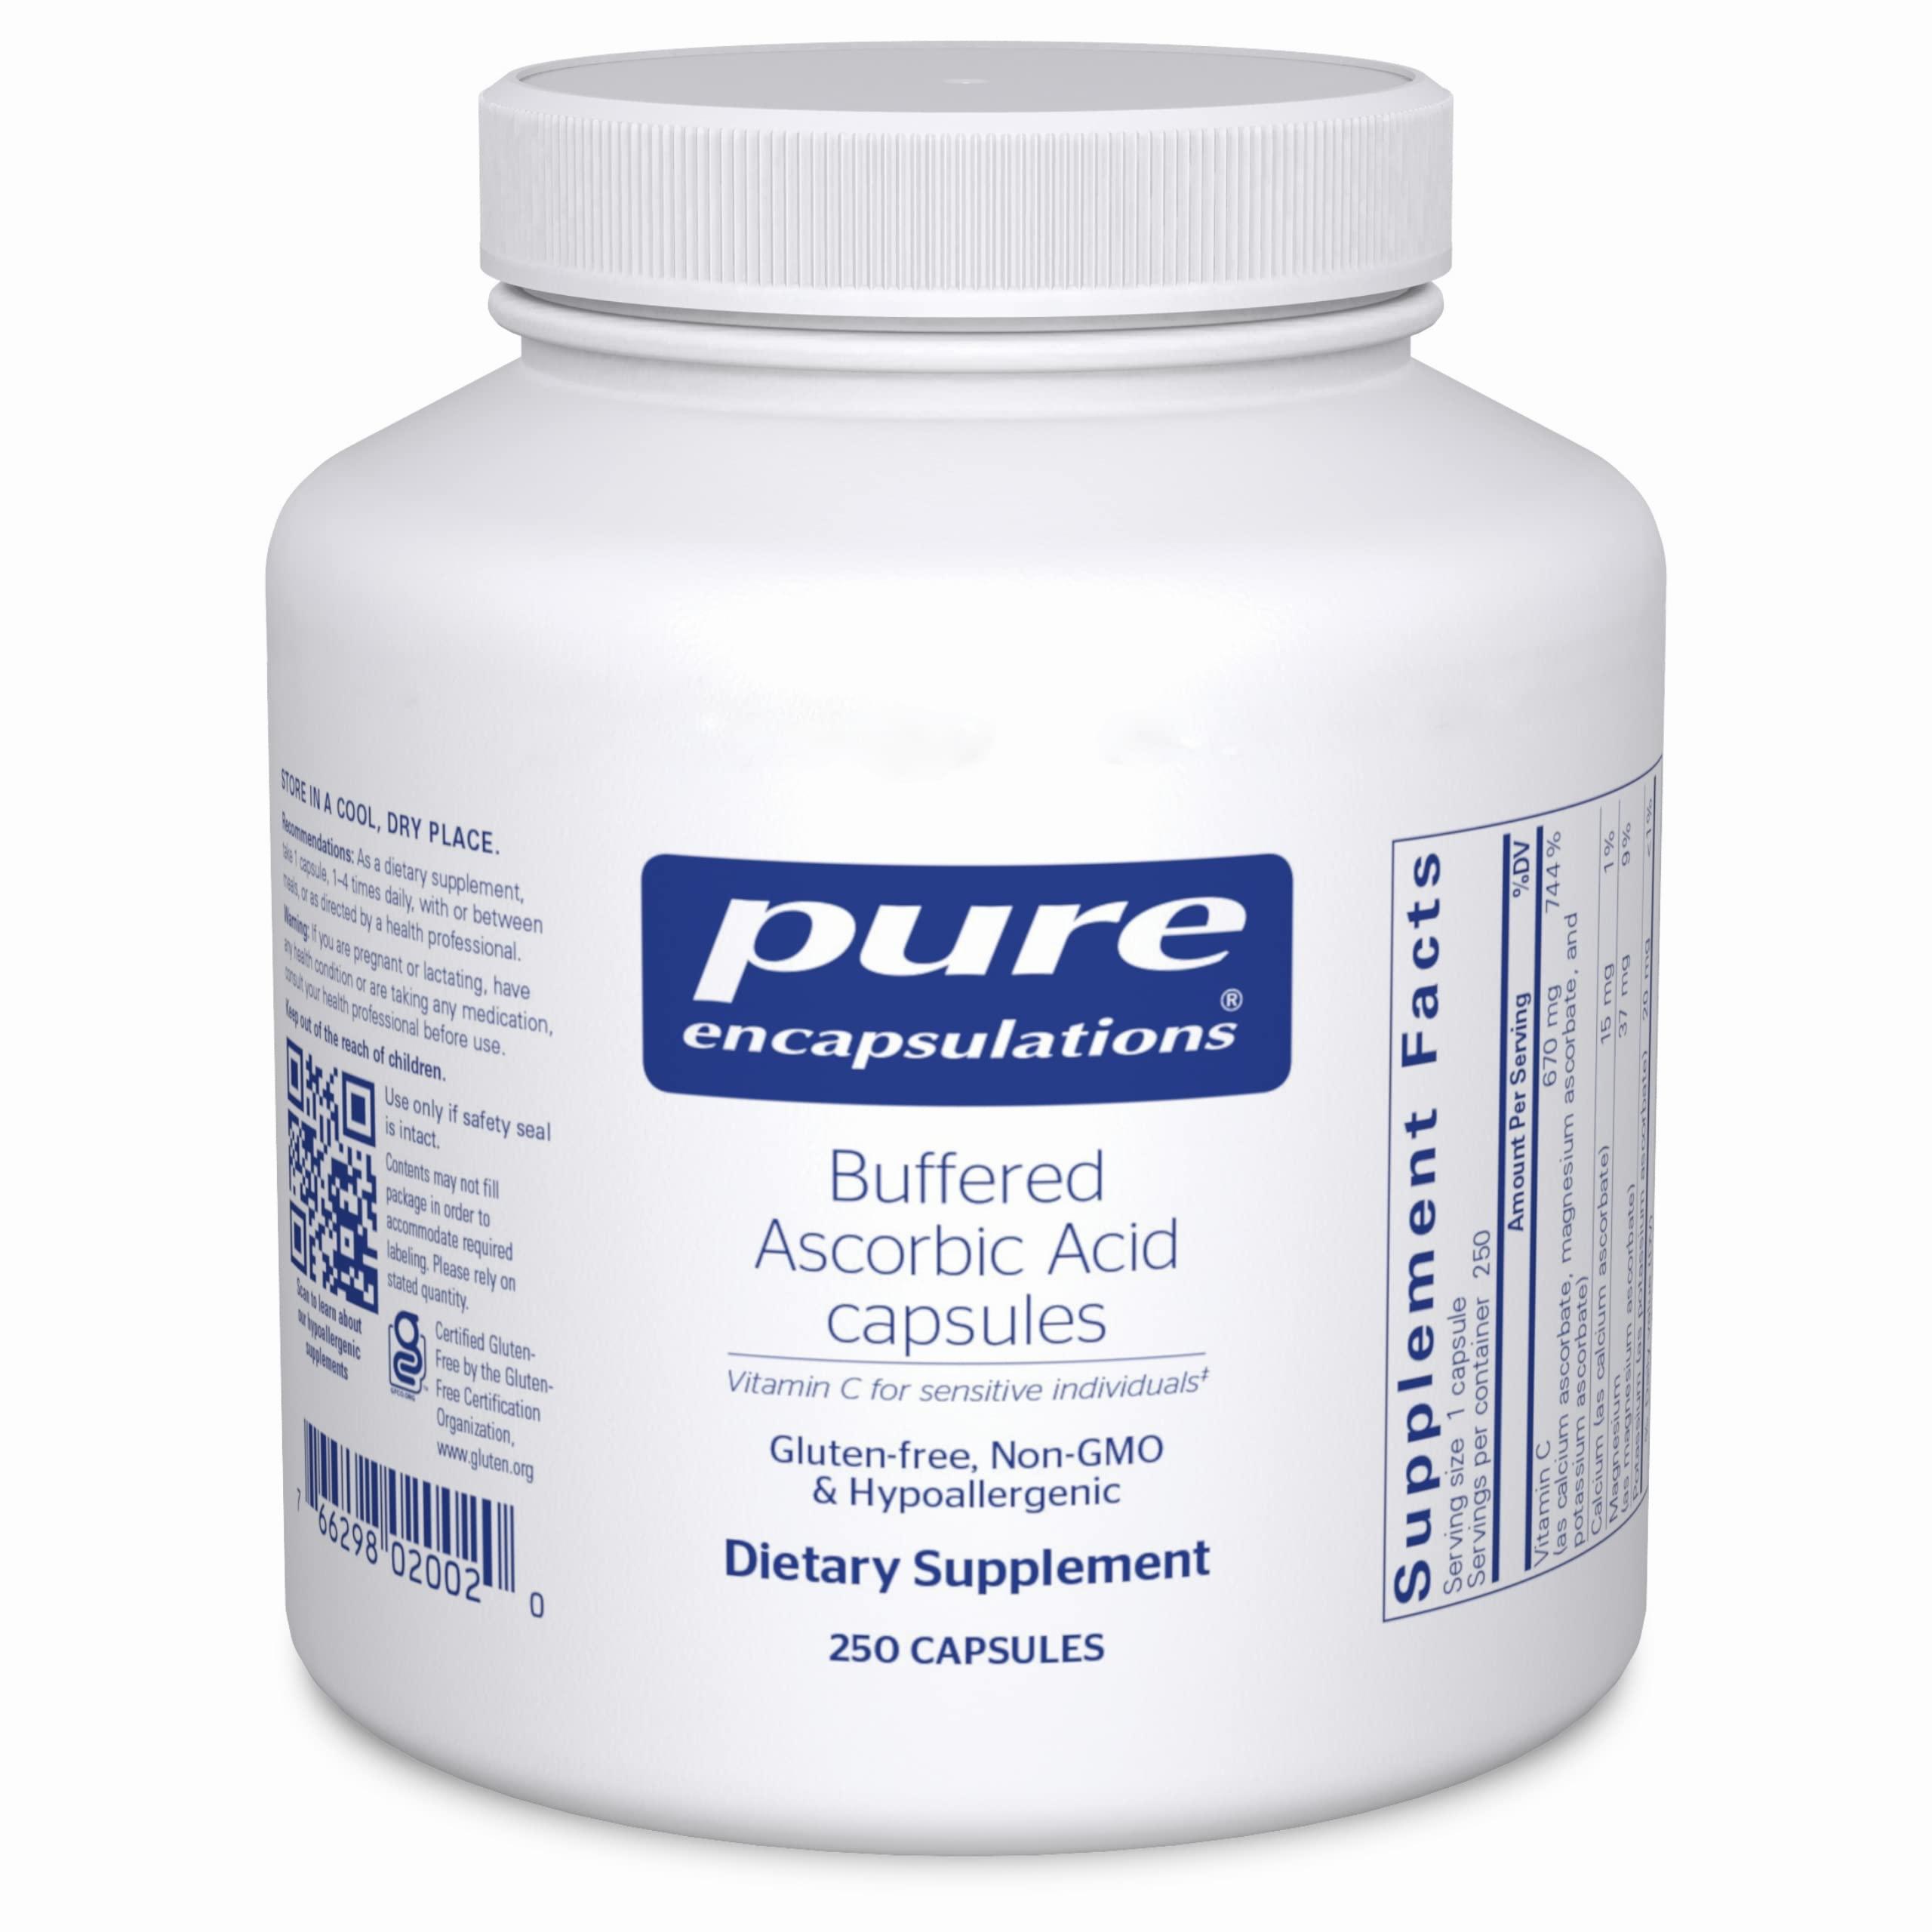 A bottle of Pure Encapsulations Buffered Ascorbic Acid, a dietary supplement containing 250 capsules of vitamin C for sensitive individuals, which is gluten-free, non-GMO, and hypoallergenic.